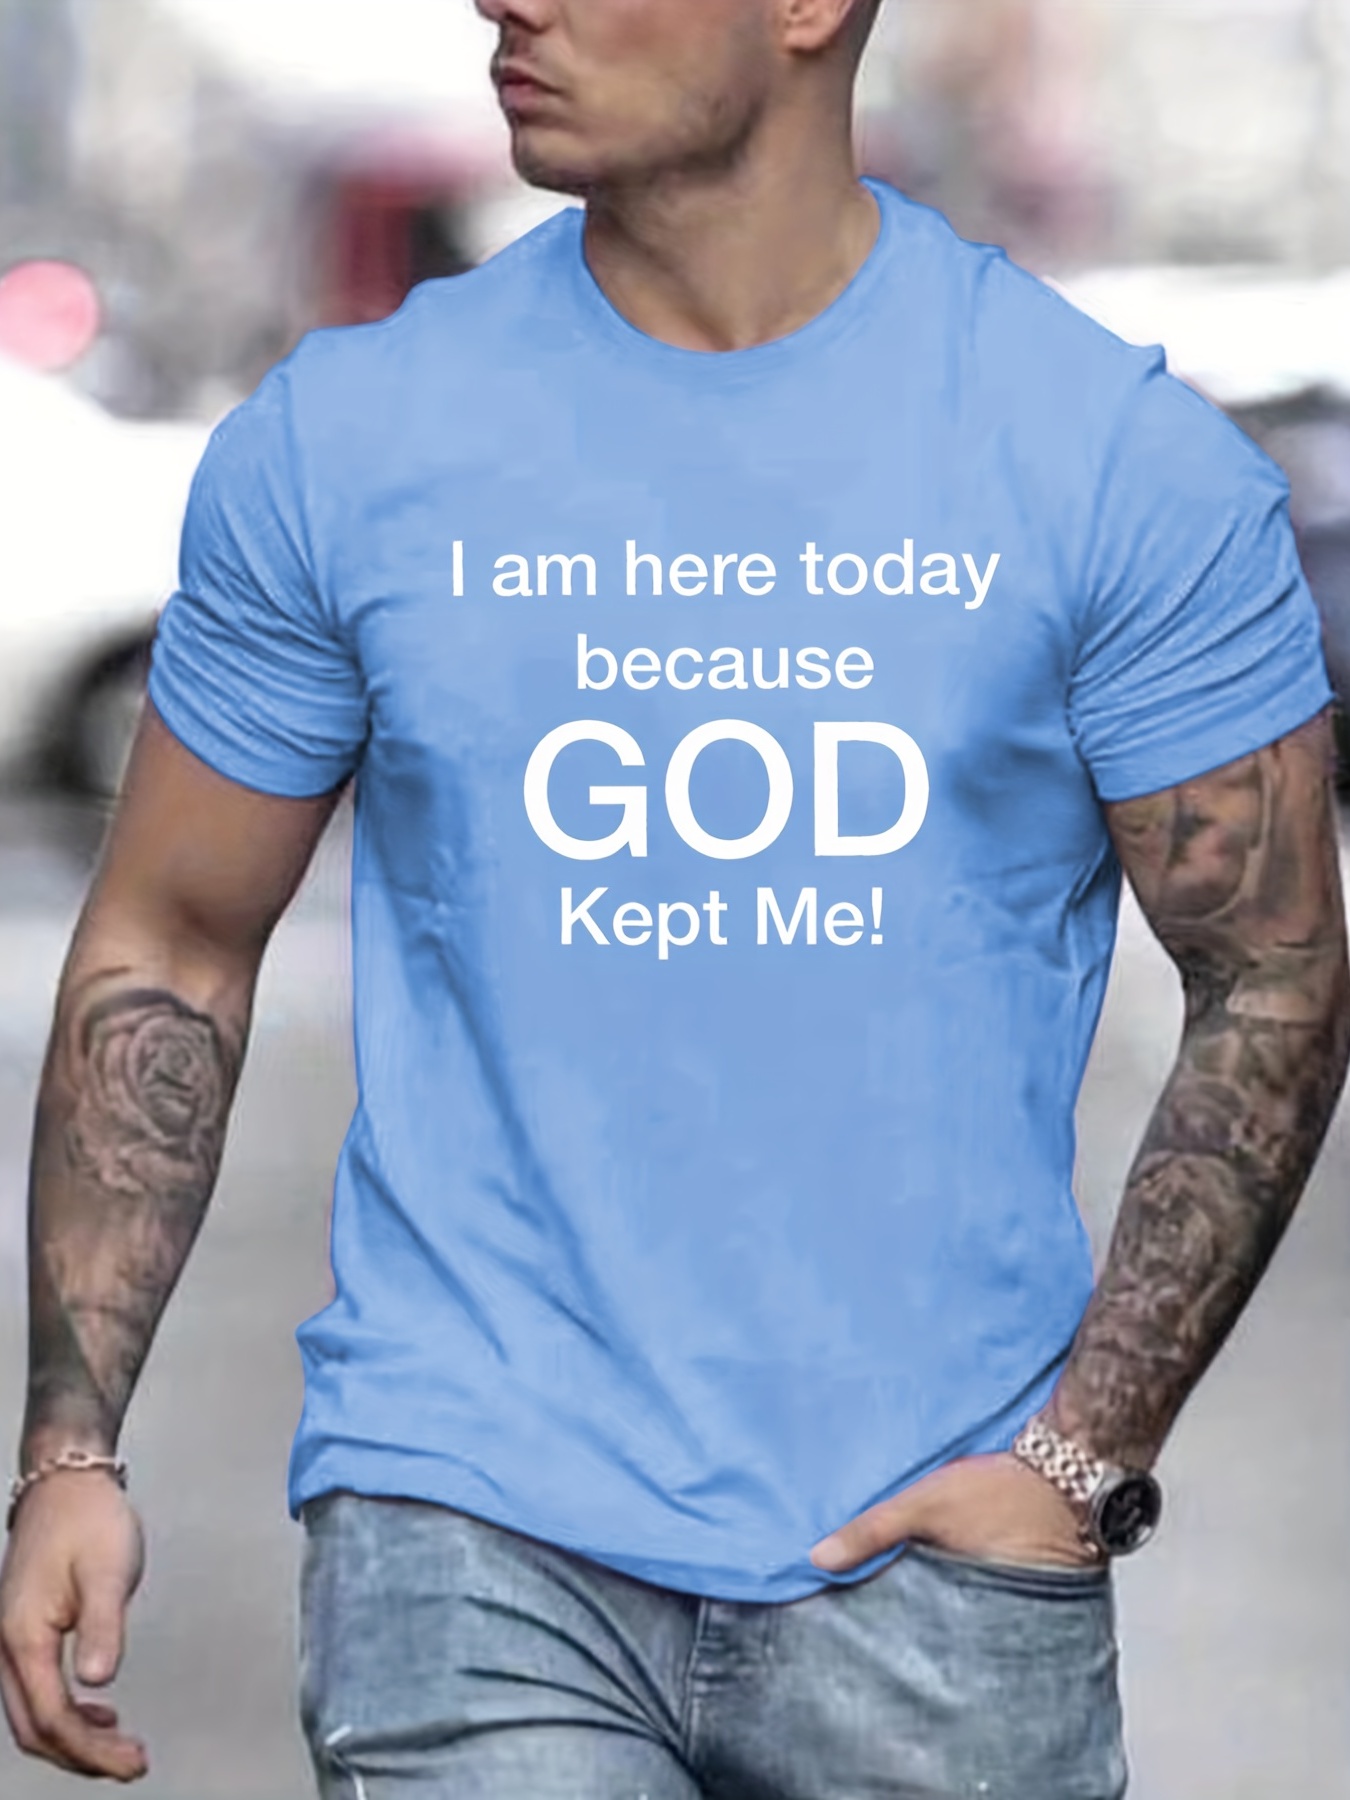 tees for men god kept me print t shirt casual short sleeve tshirt for summer spring fall tops as gifts details 24